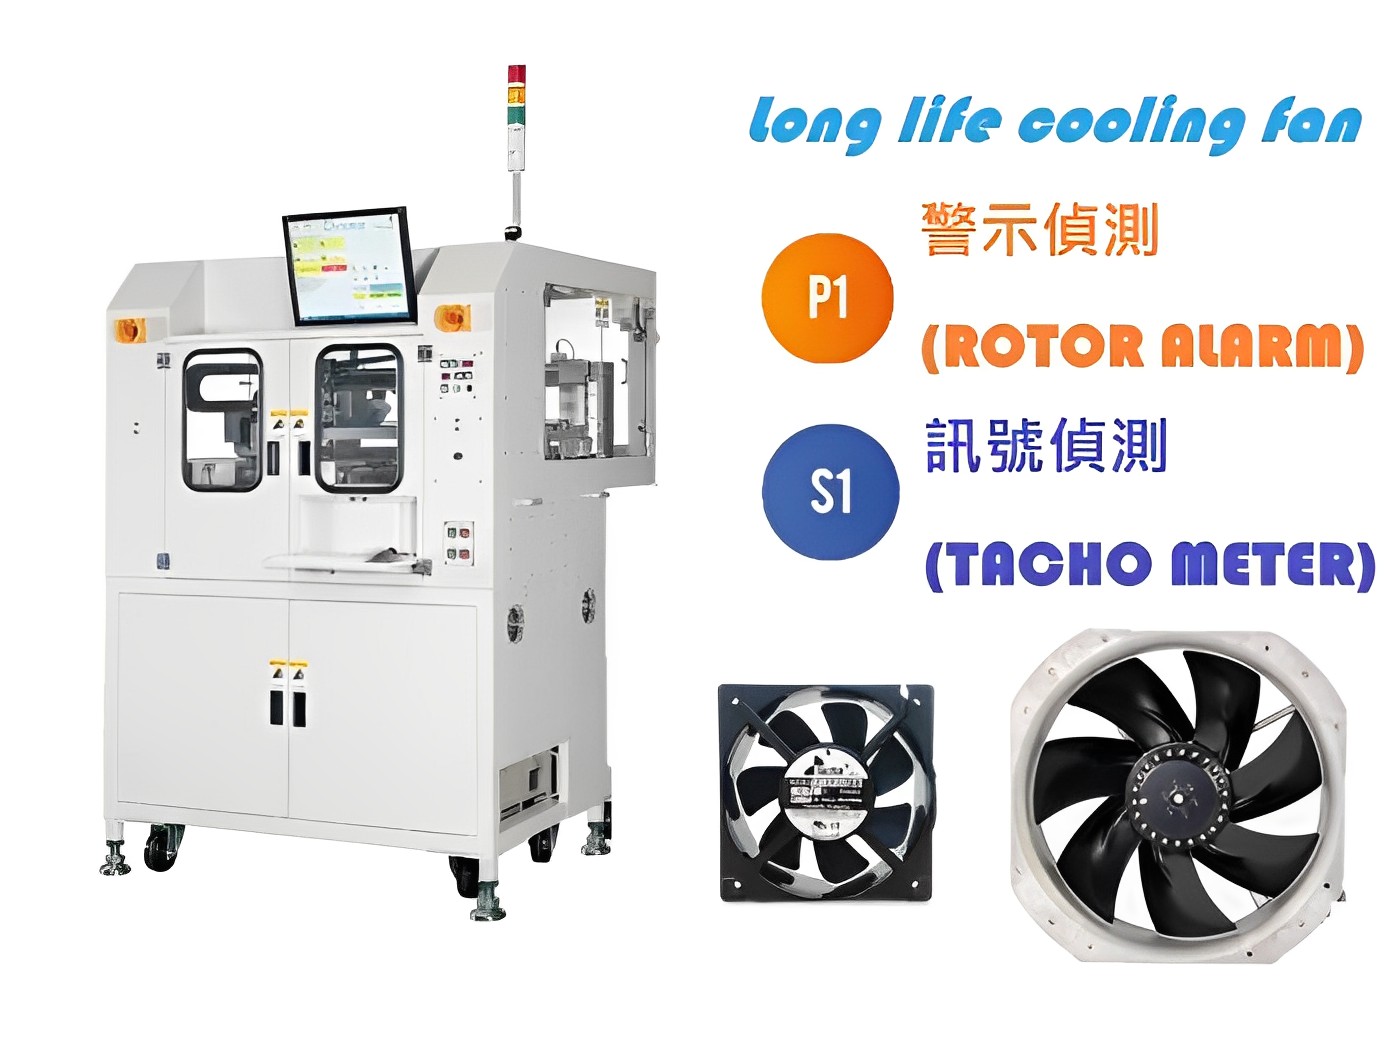 AC Fan Application: Cooling fans with high life expectancy and P1 warning and S1 speed signal output for semiconductor equipment.